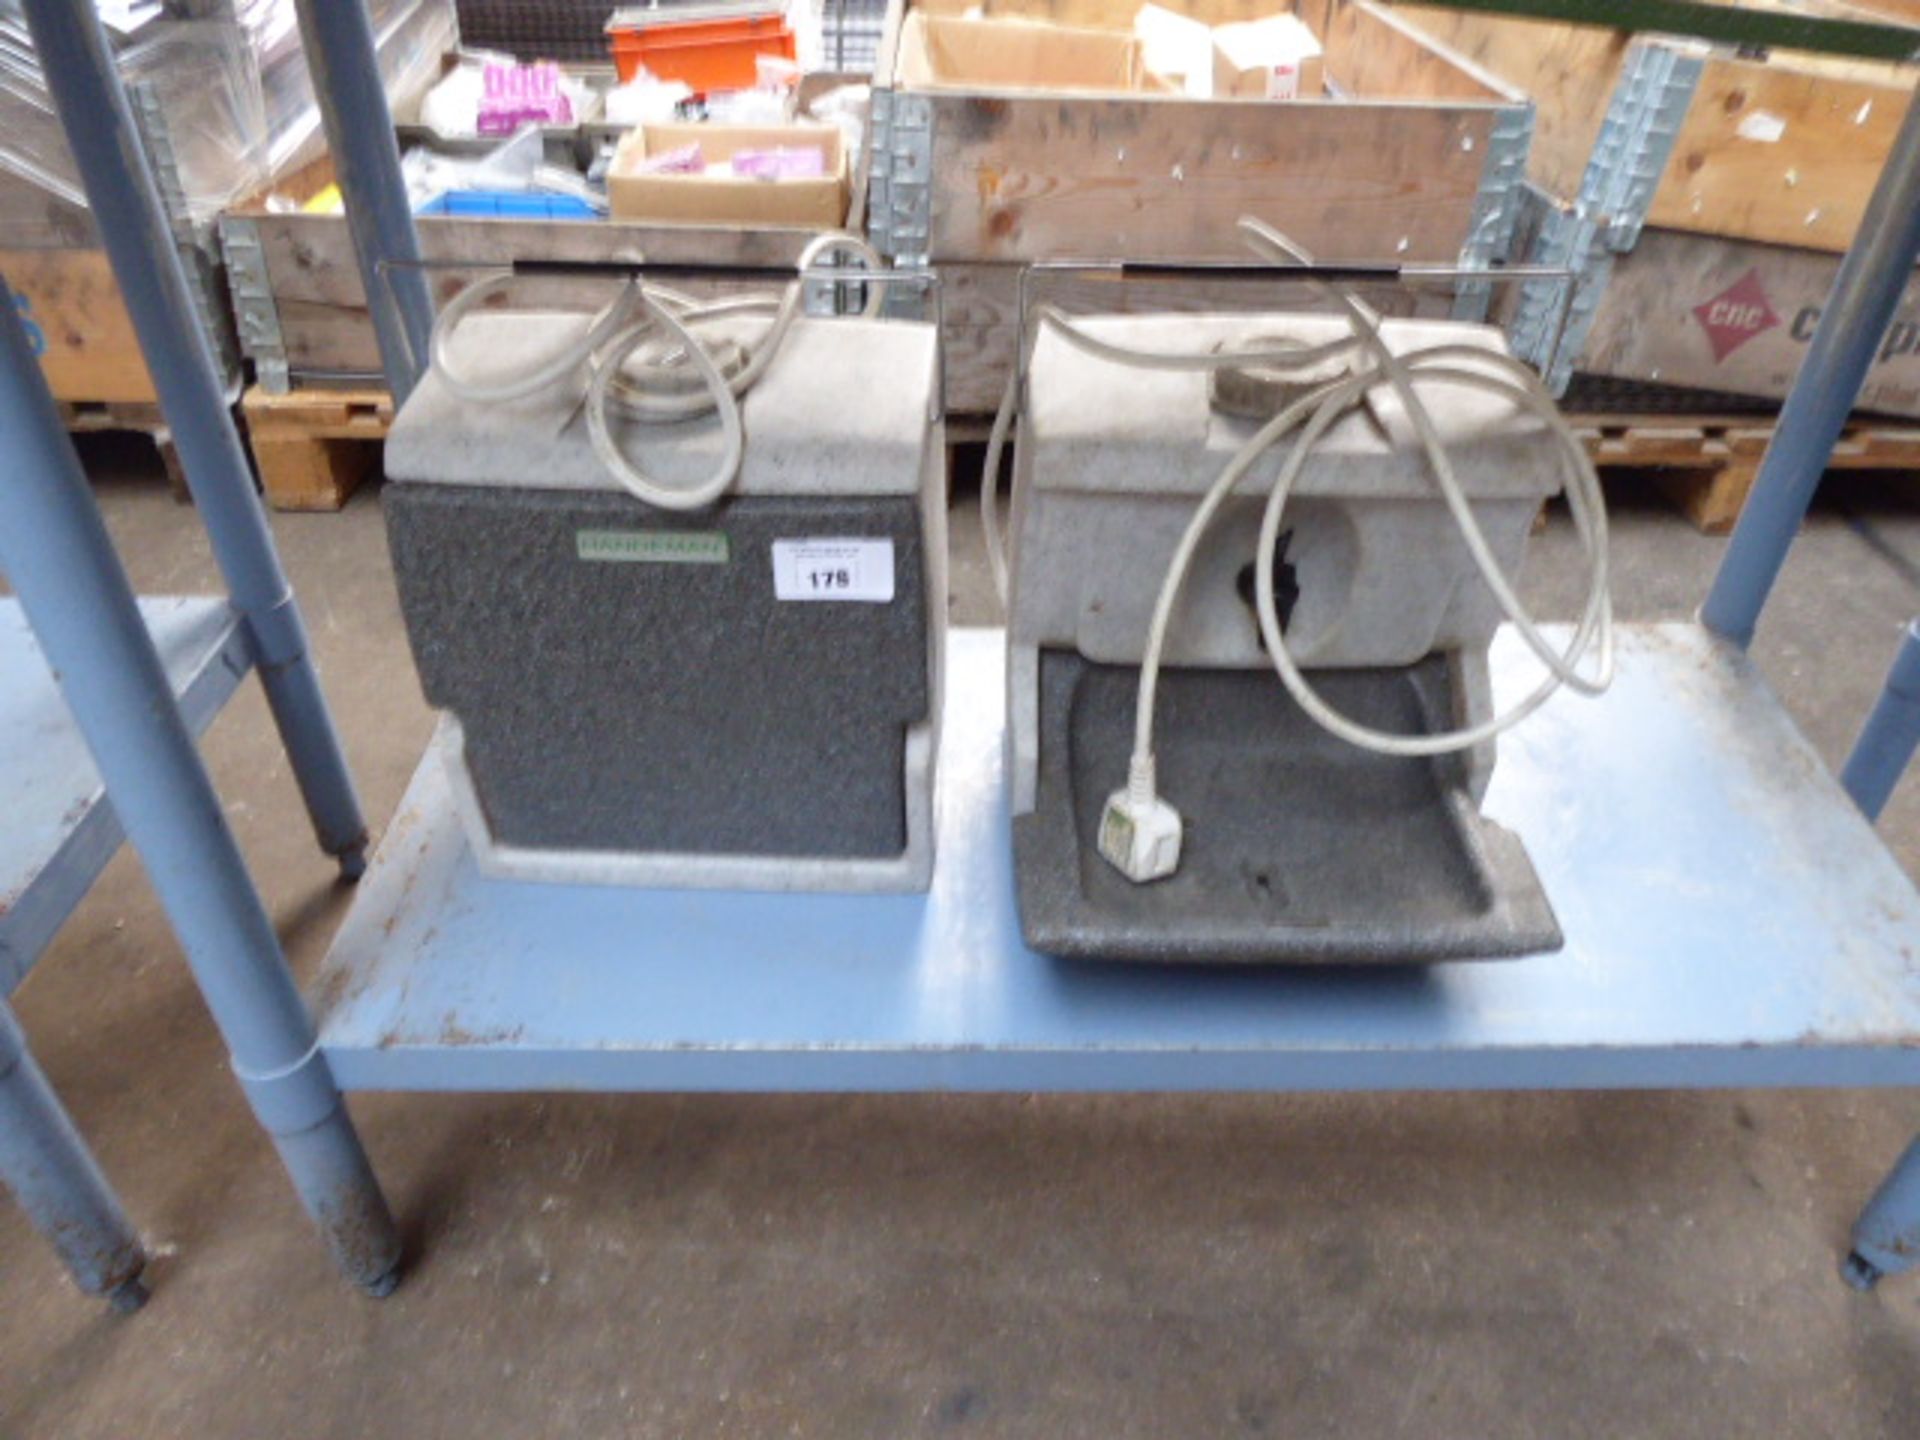 Two Handeman mobile hand wash stations (188)